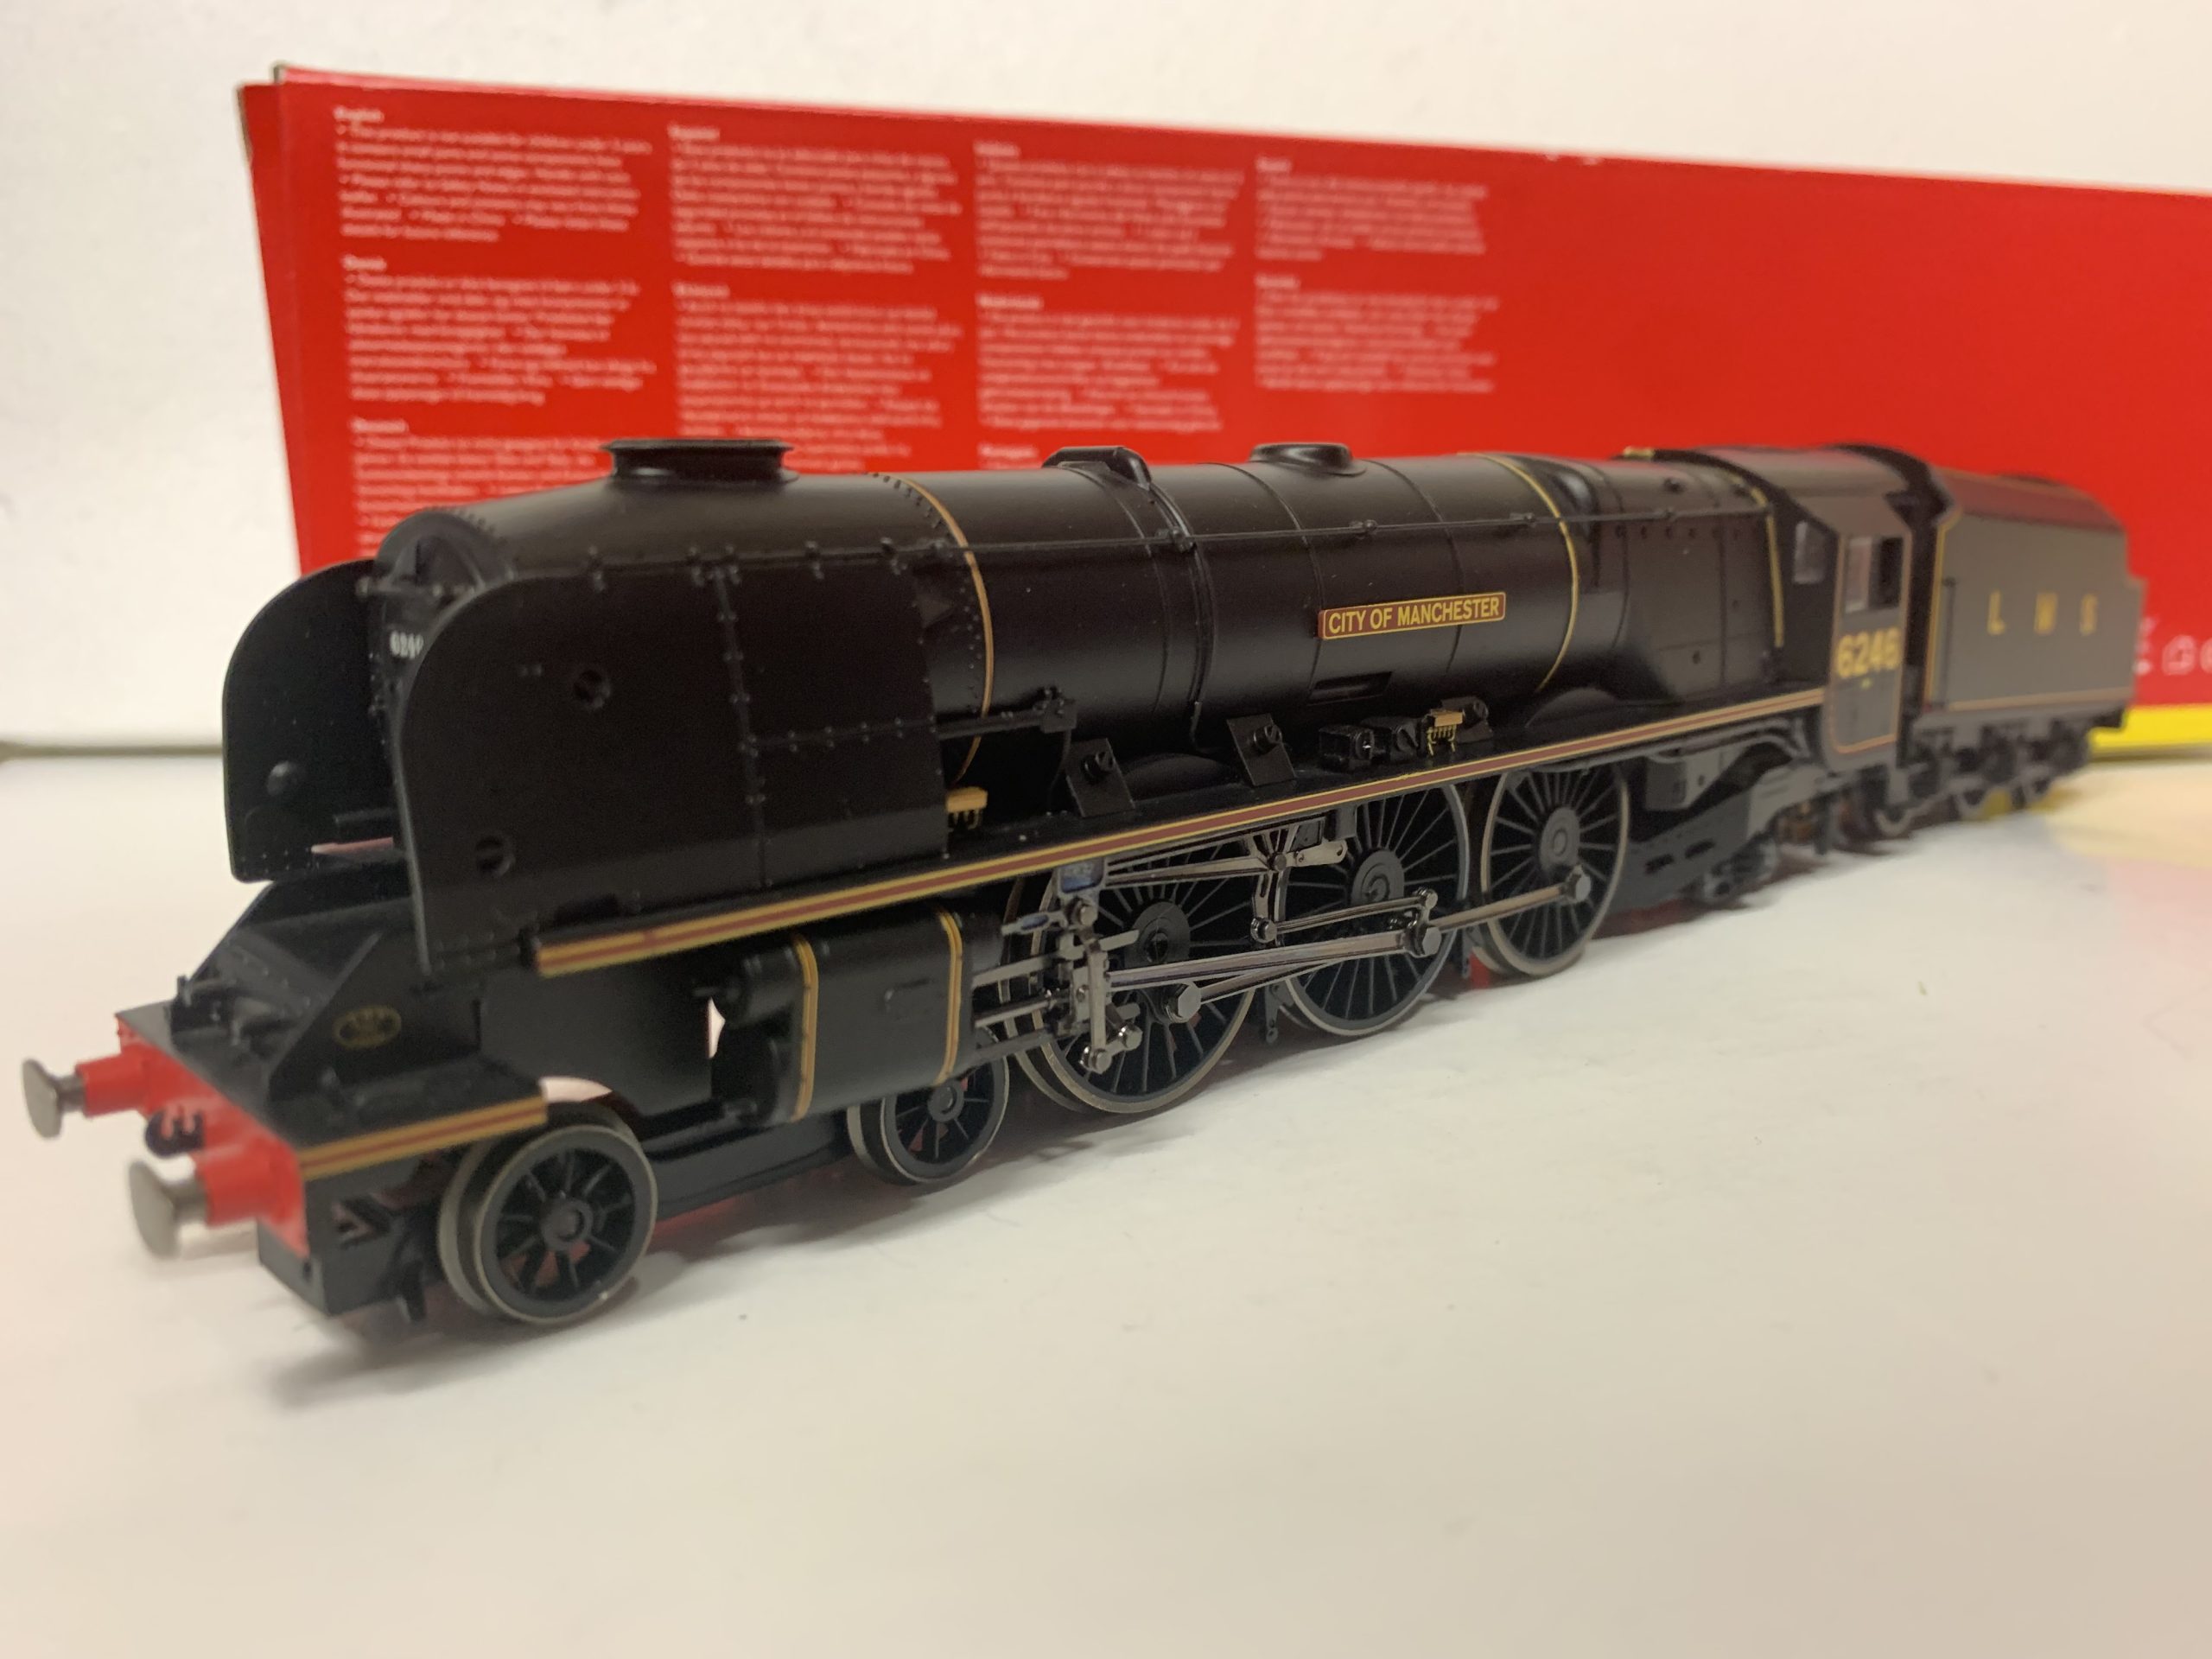 HORNBY R2856 DCC READY LMS 4-6-2 DUCHESS CLASS LOCO 6246 CITY of MANCHESTER nq